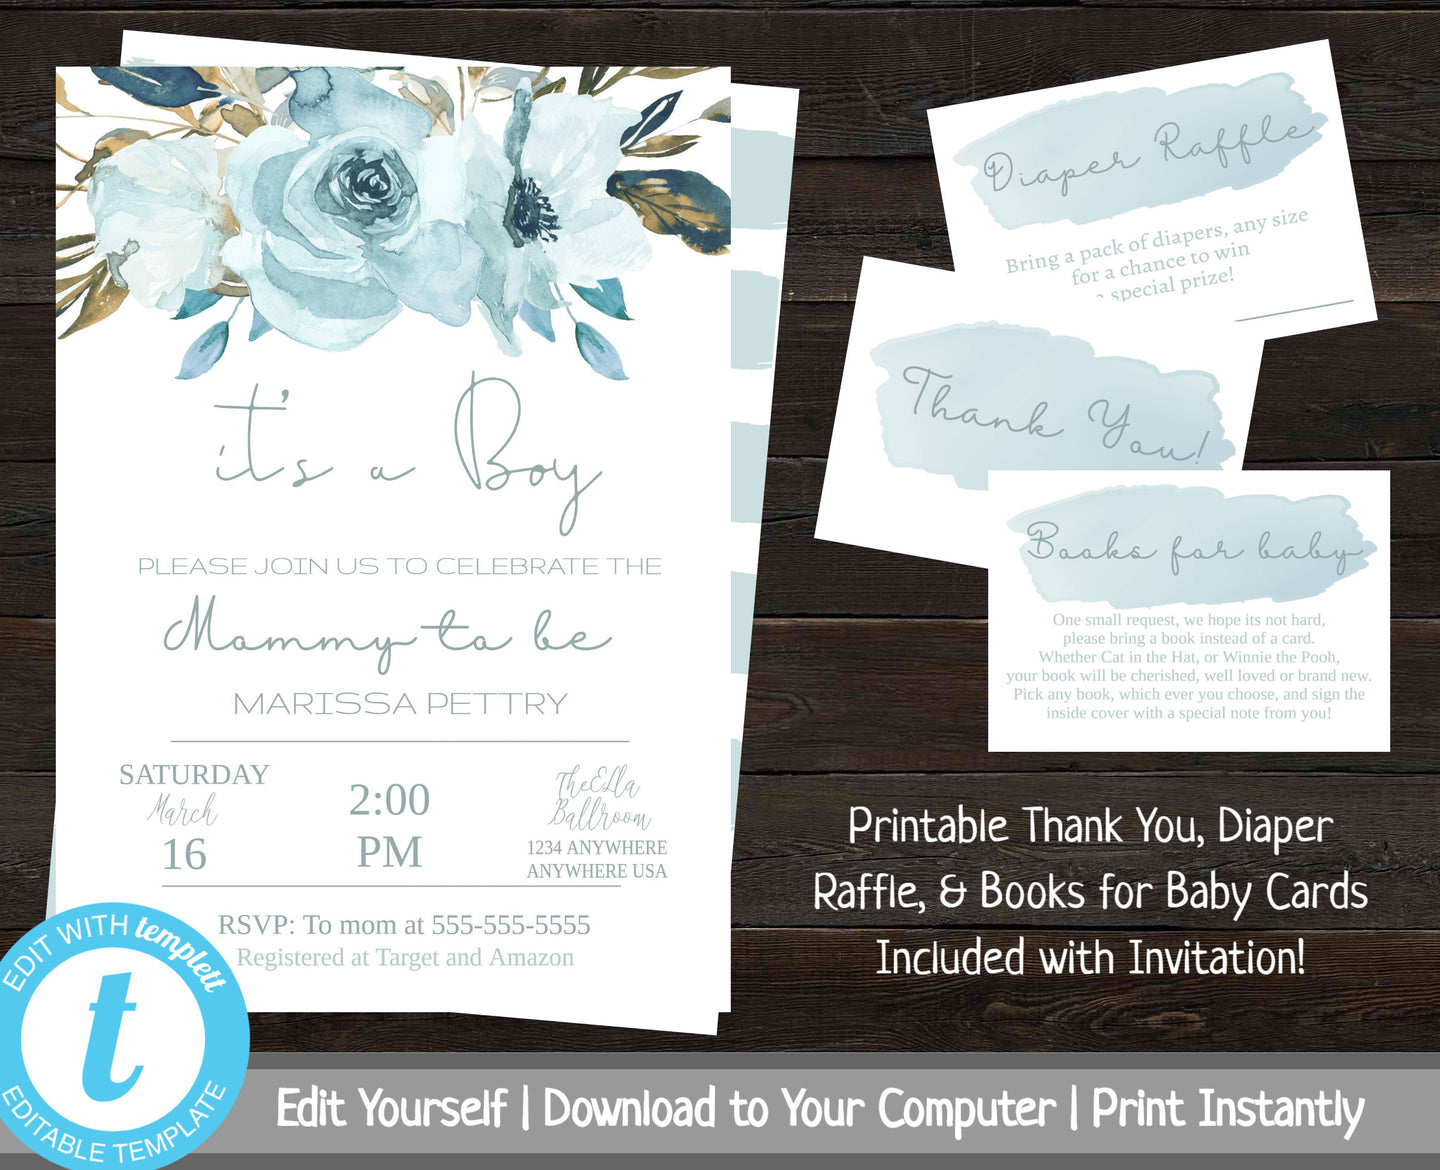 Floral Baby Shower Invitation Set, Baby Shower Invitation Boy, Baby Shower Bundle, Baby Shower Package, Printable Invite, Blue Watercolor